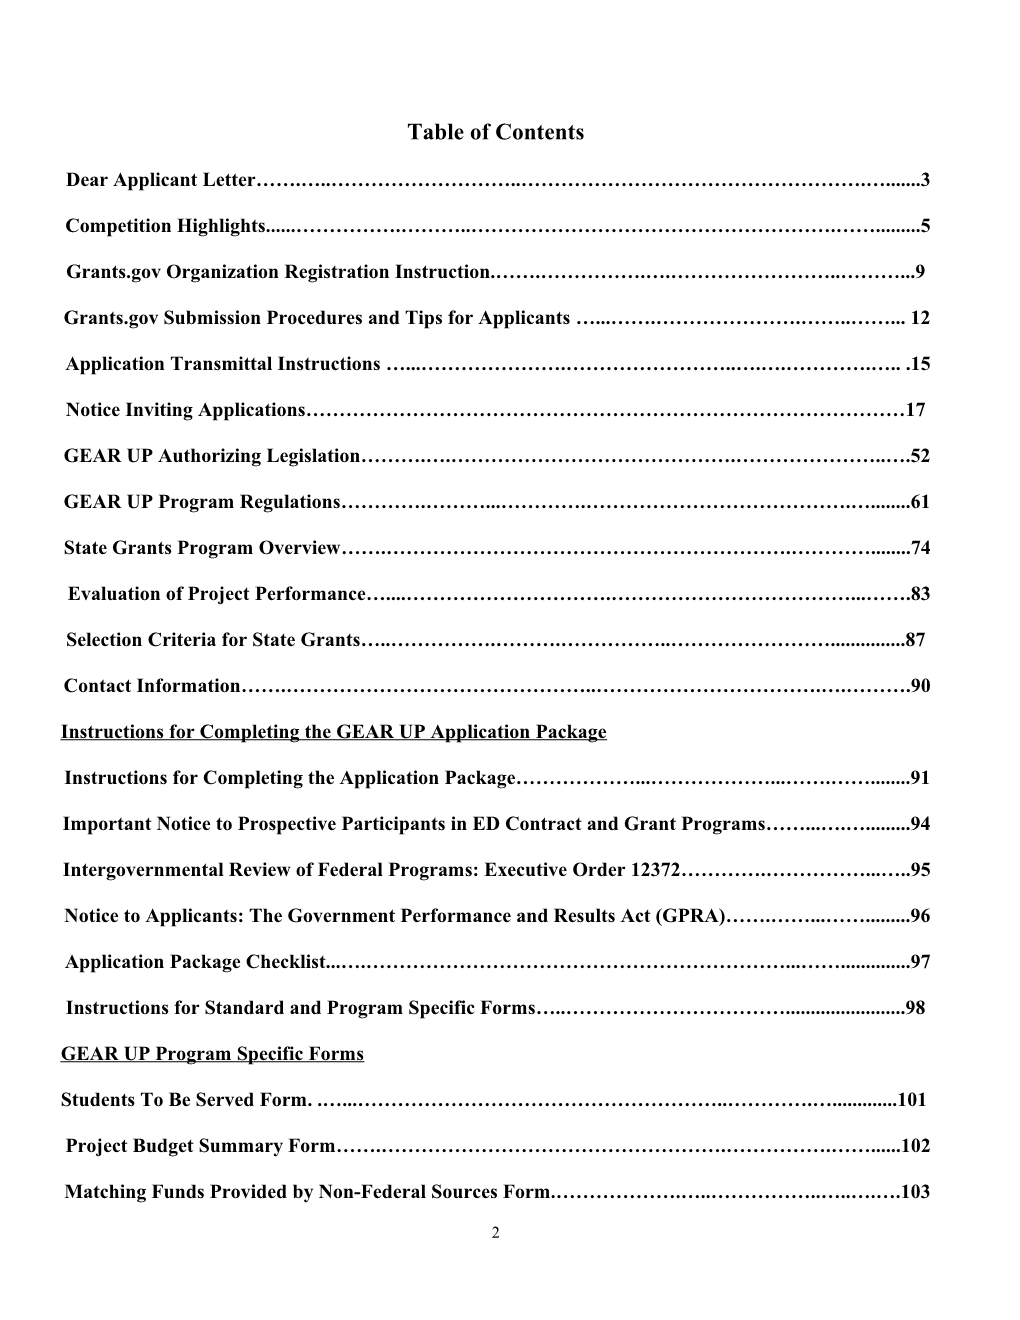 Archived: FY 2014 Grant Application - GEAR up State Grants (MS Word)